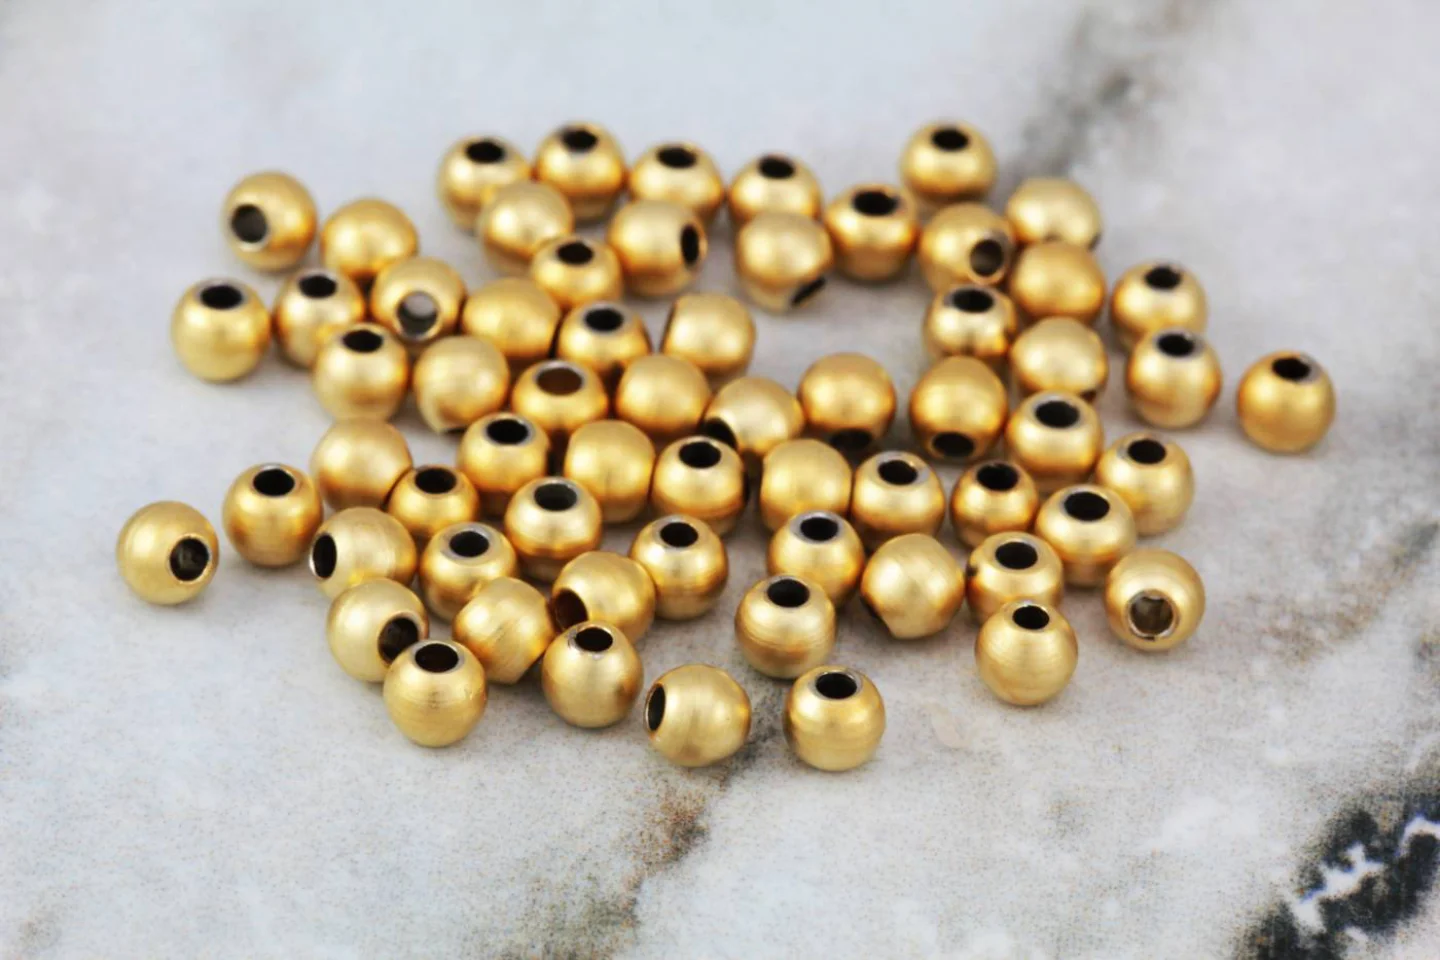 3mm-gold-plated-mini-ball-spacer-bead.